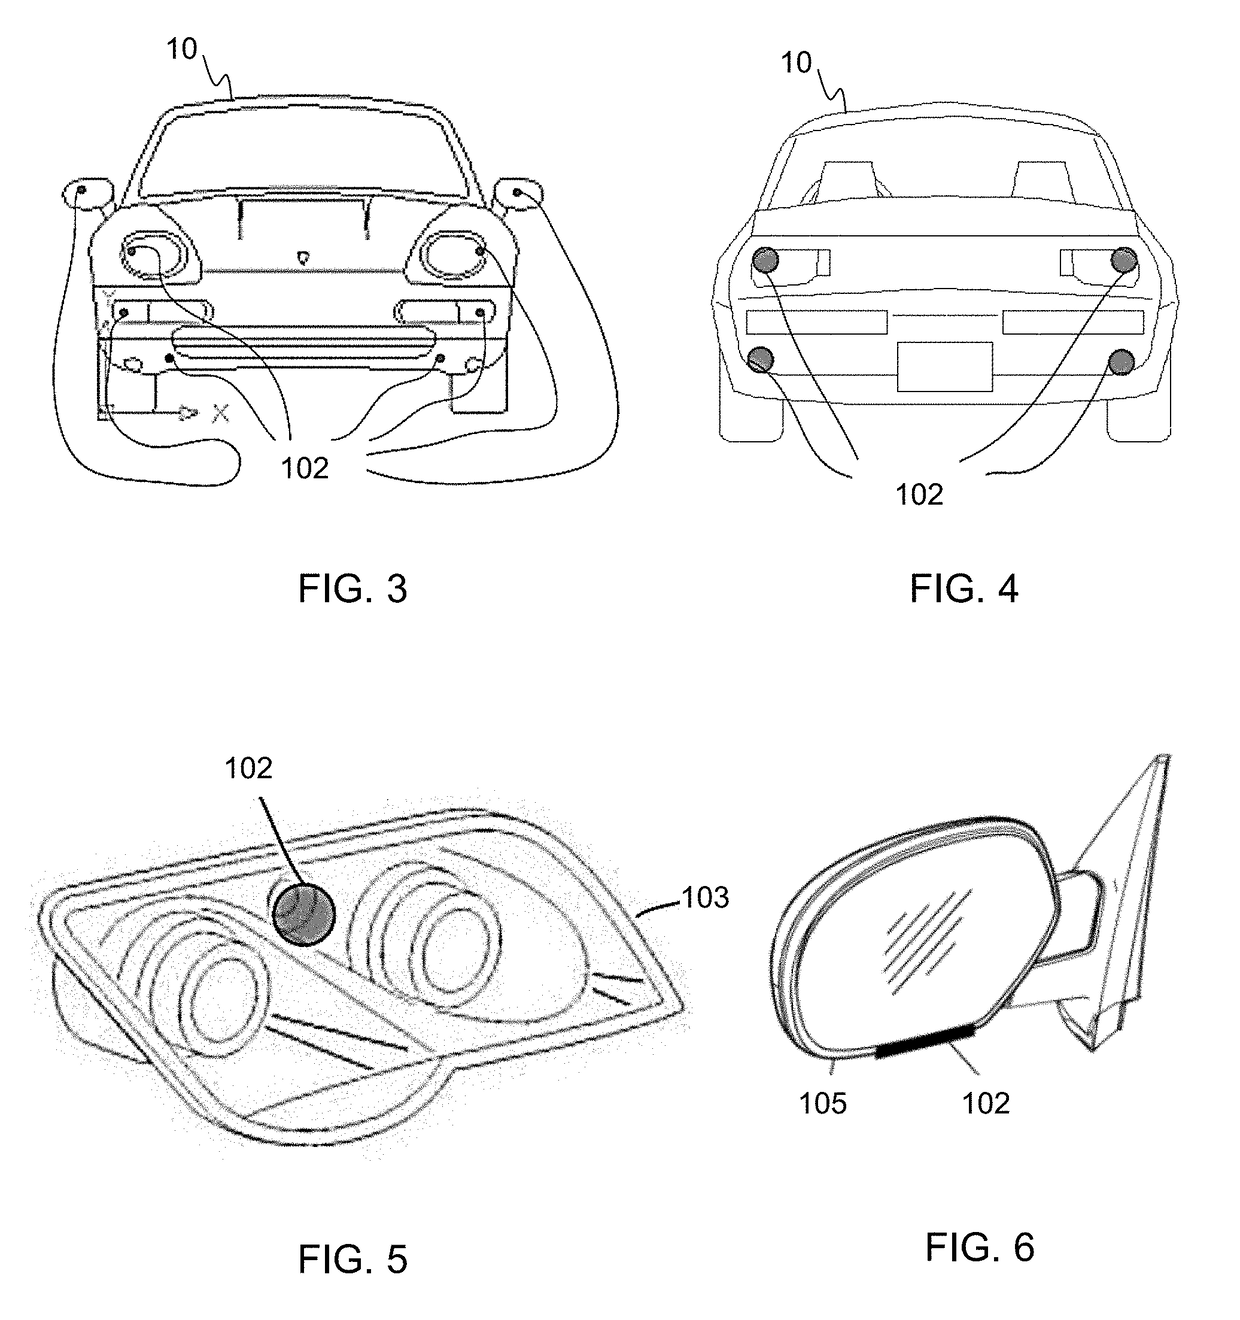 Audio processing for vehicle sensory systems